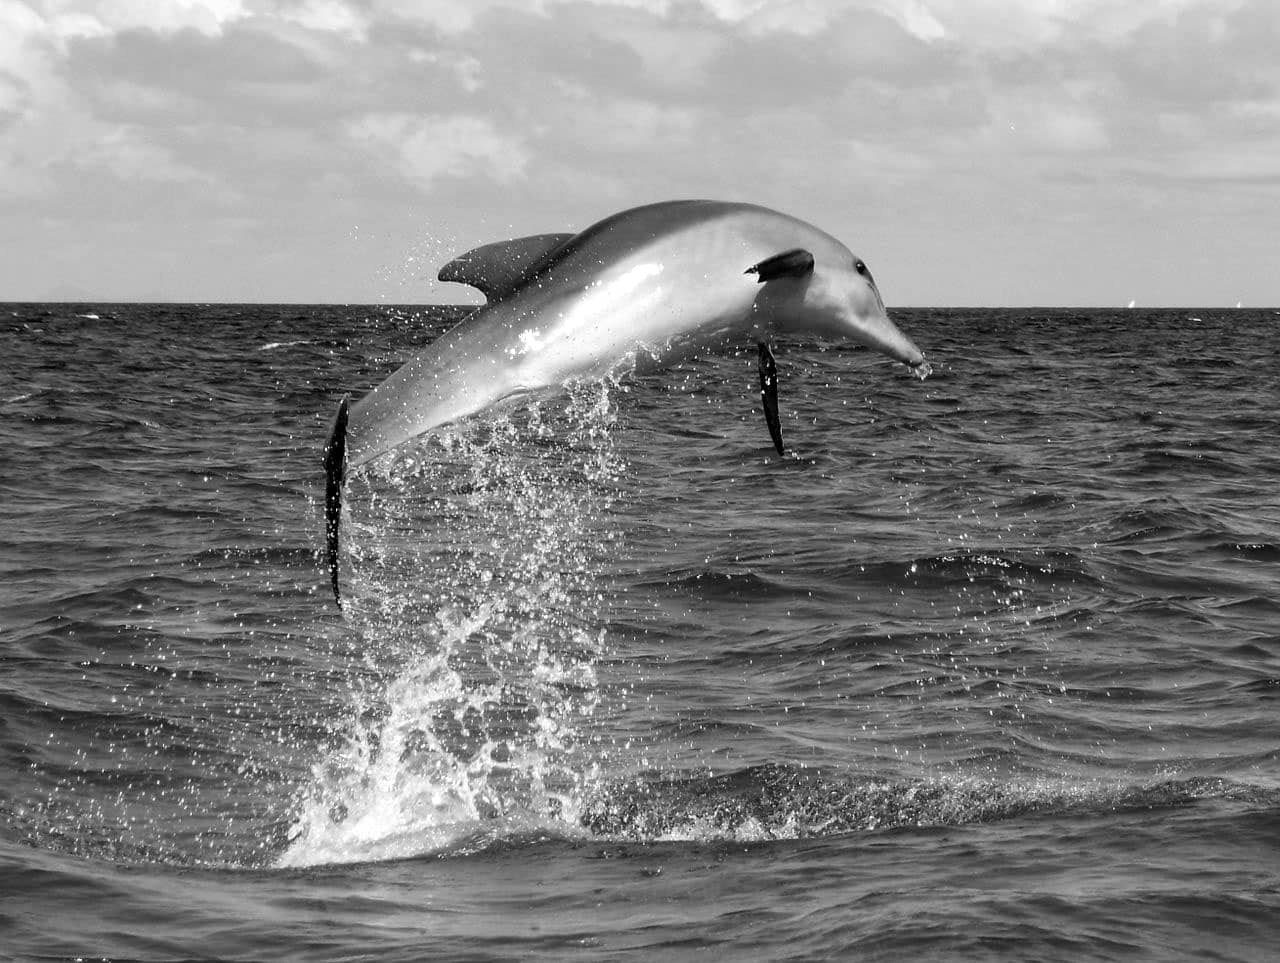 Dolphin jumping out of the Indian Ocean water, along the Zanzibar coast